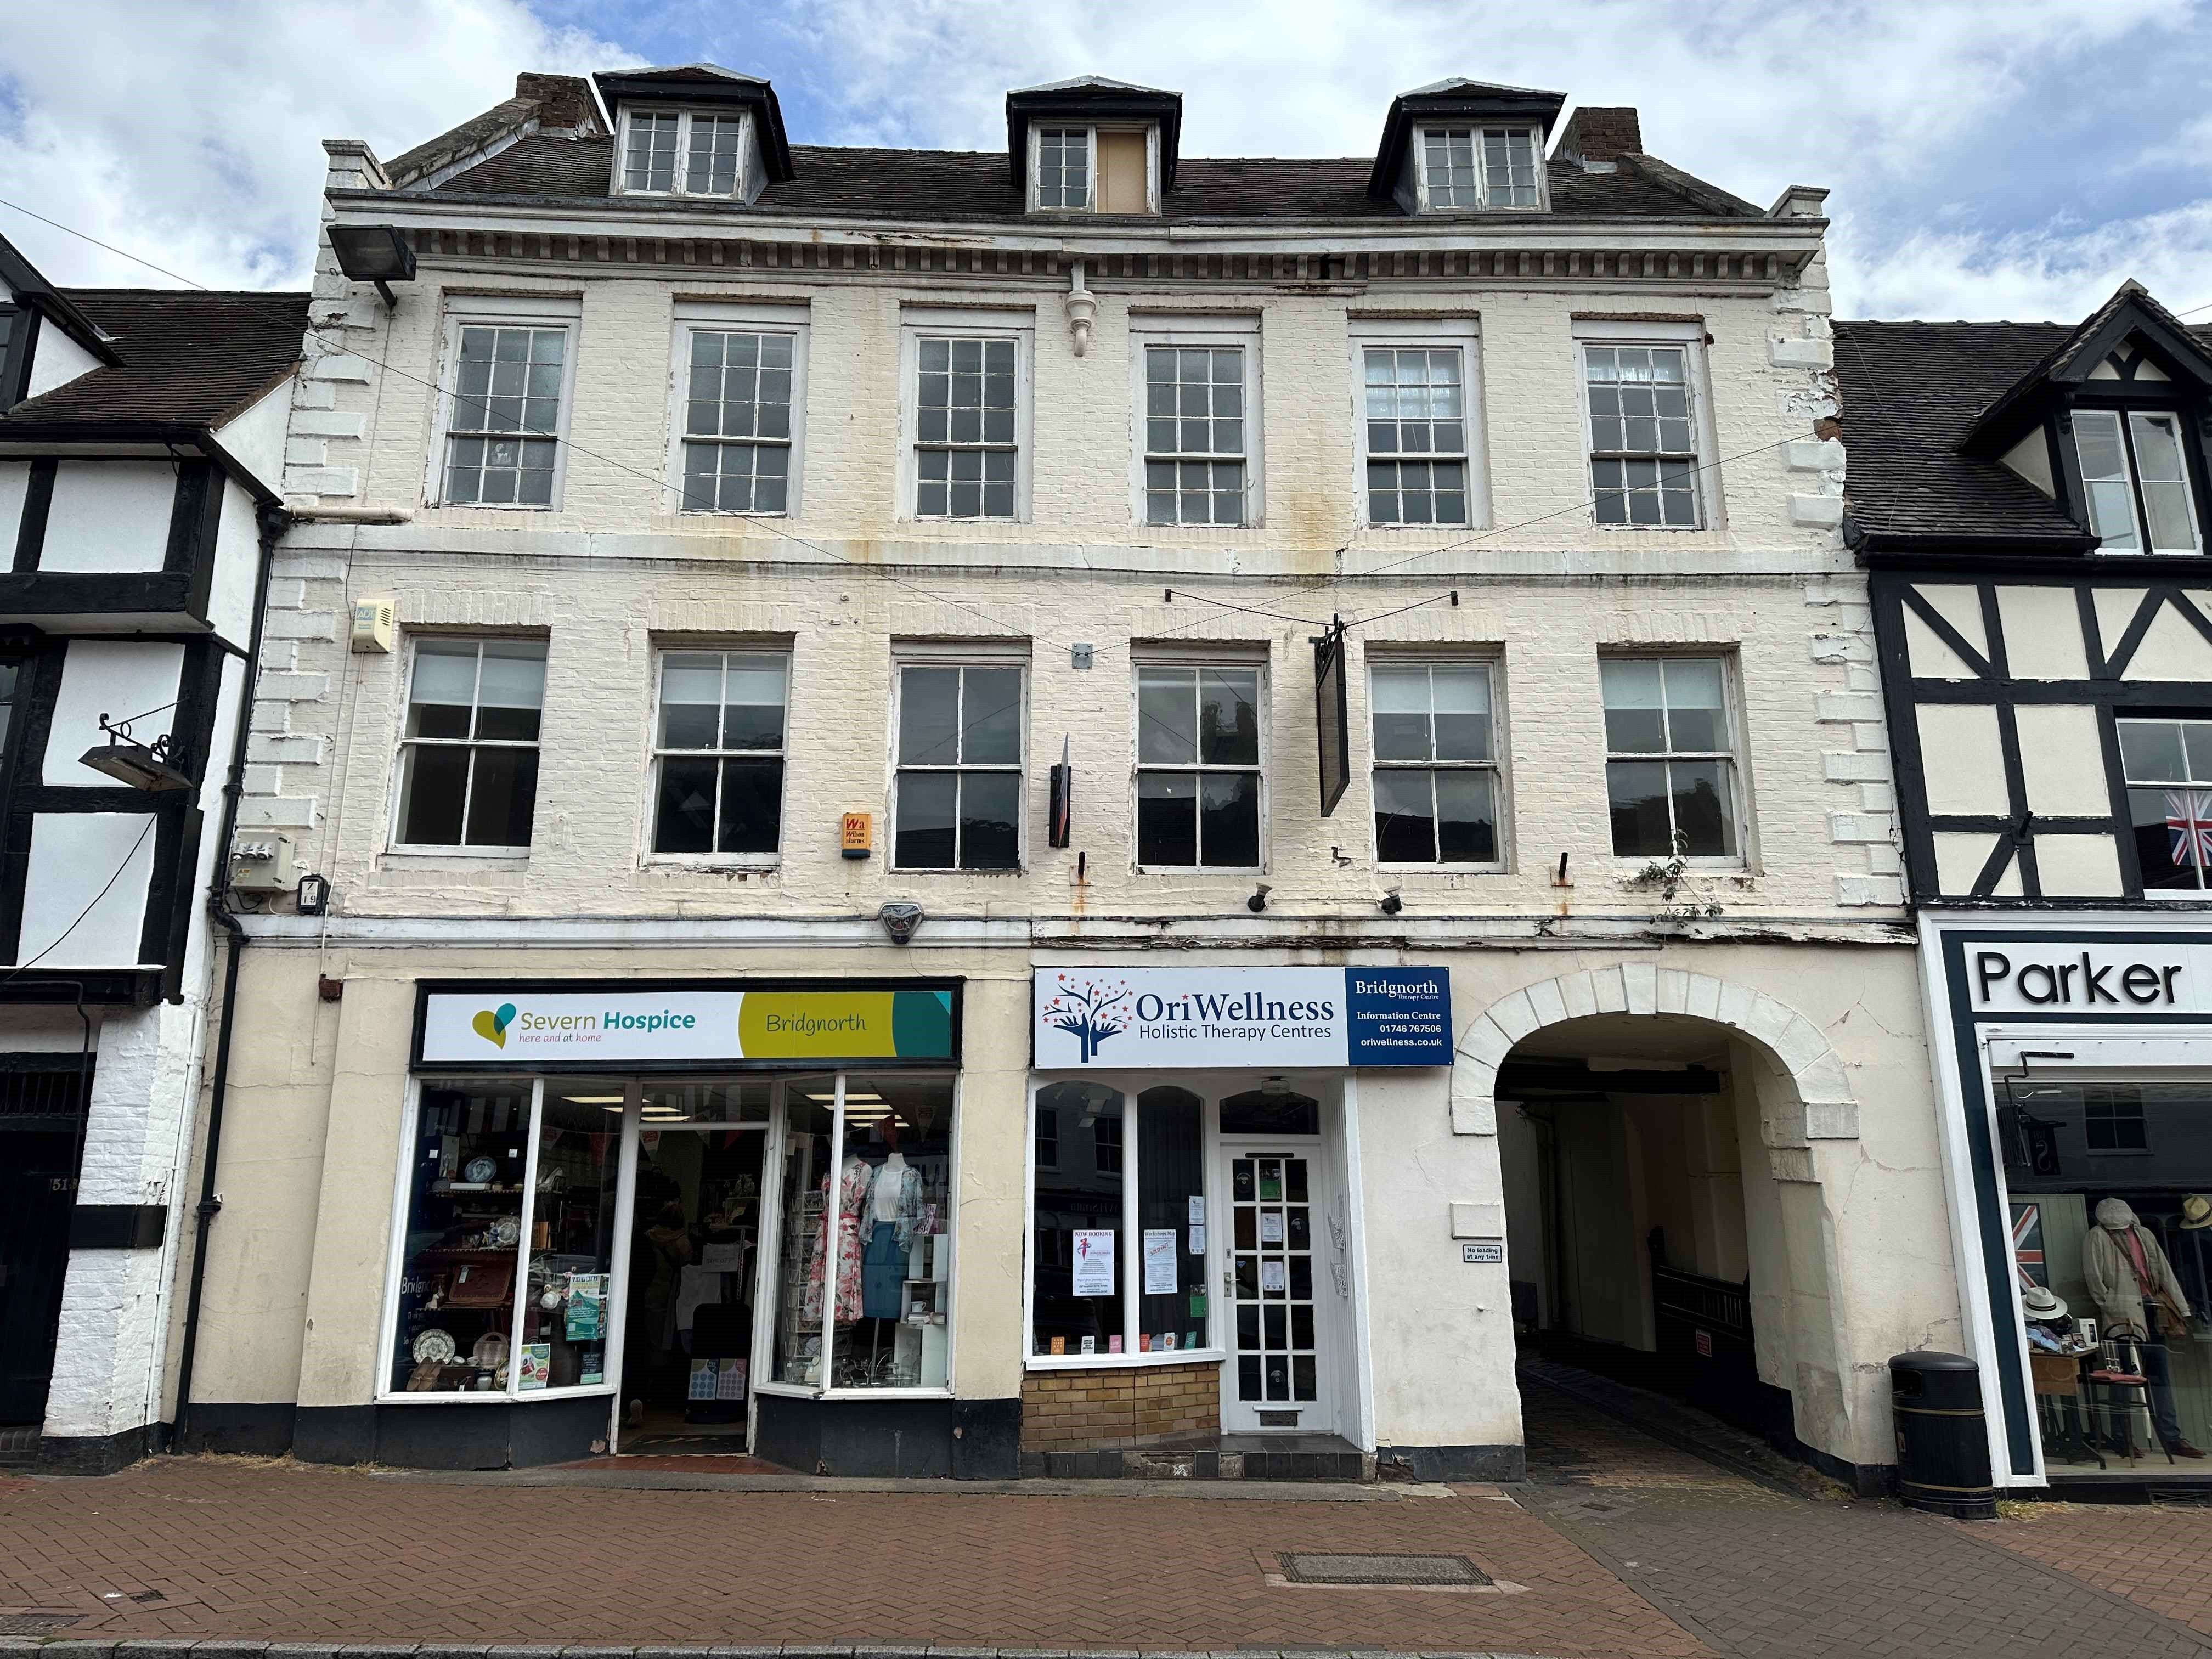 Inside 18th century town centre property being sold at auction for £180k